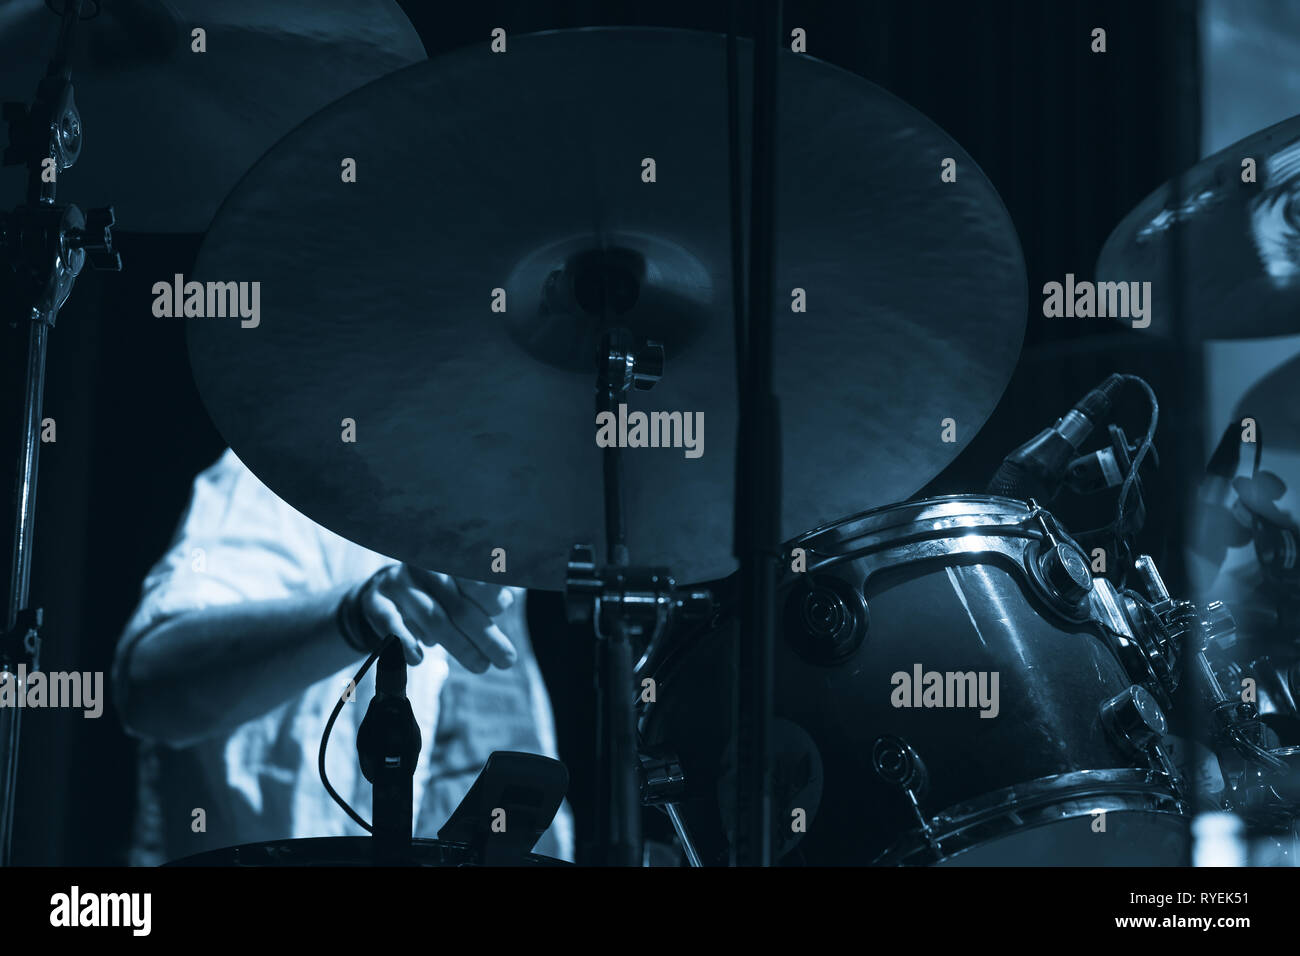 Live music photo, drum set with cymbals. Blue tonal filter effect Stock Photo